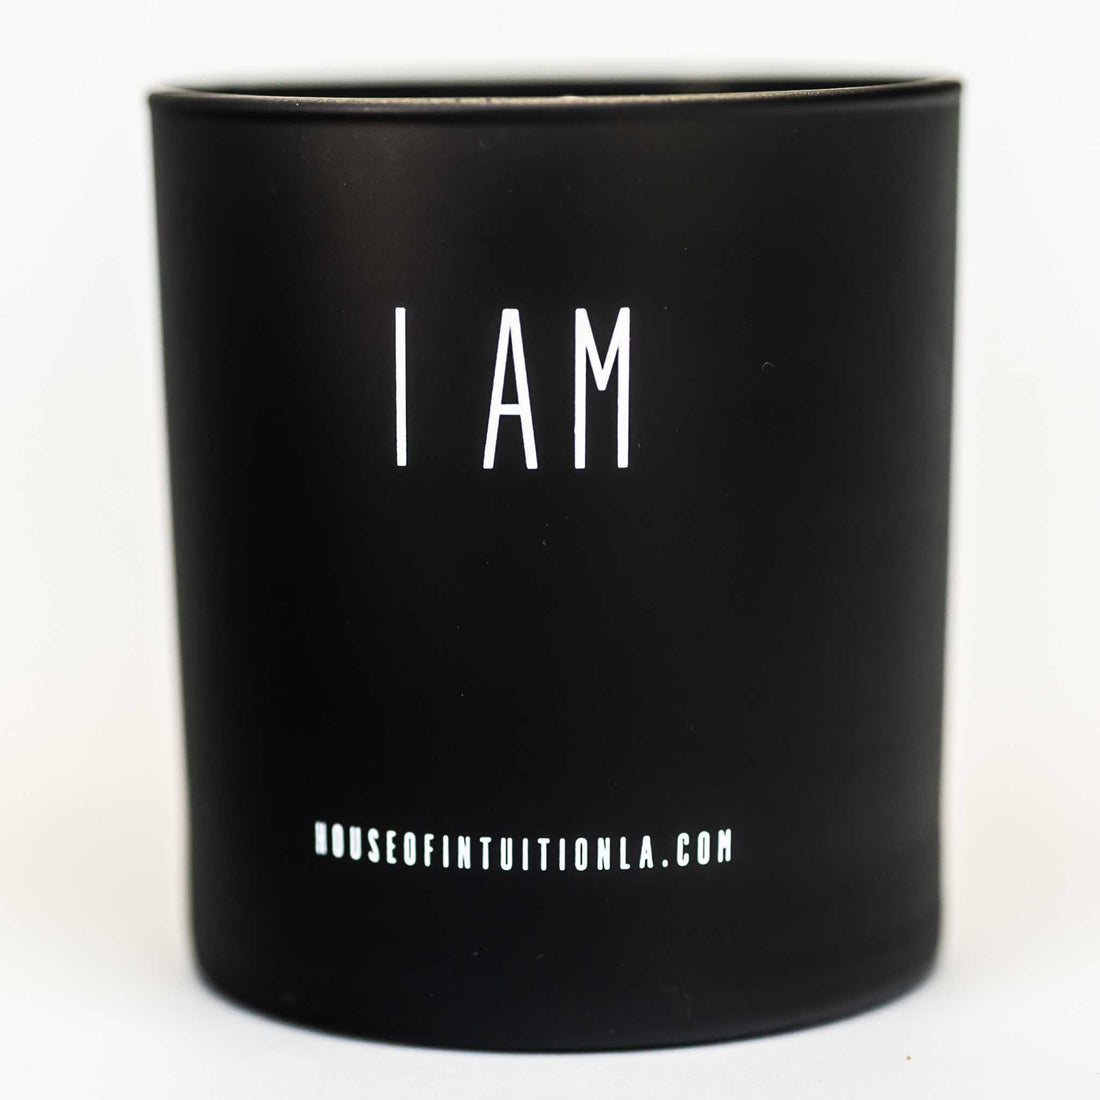 I AM Loved - Affirmation Soy Candle I AM - Affirmation Candles House of Intuition 